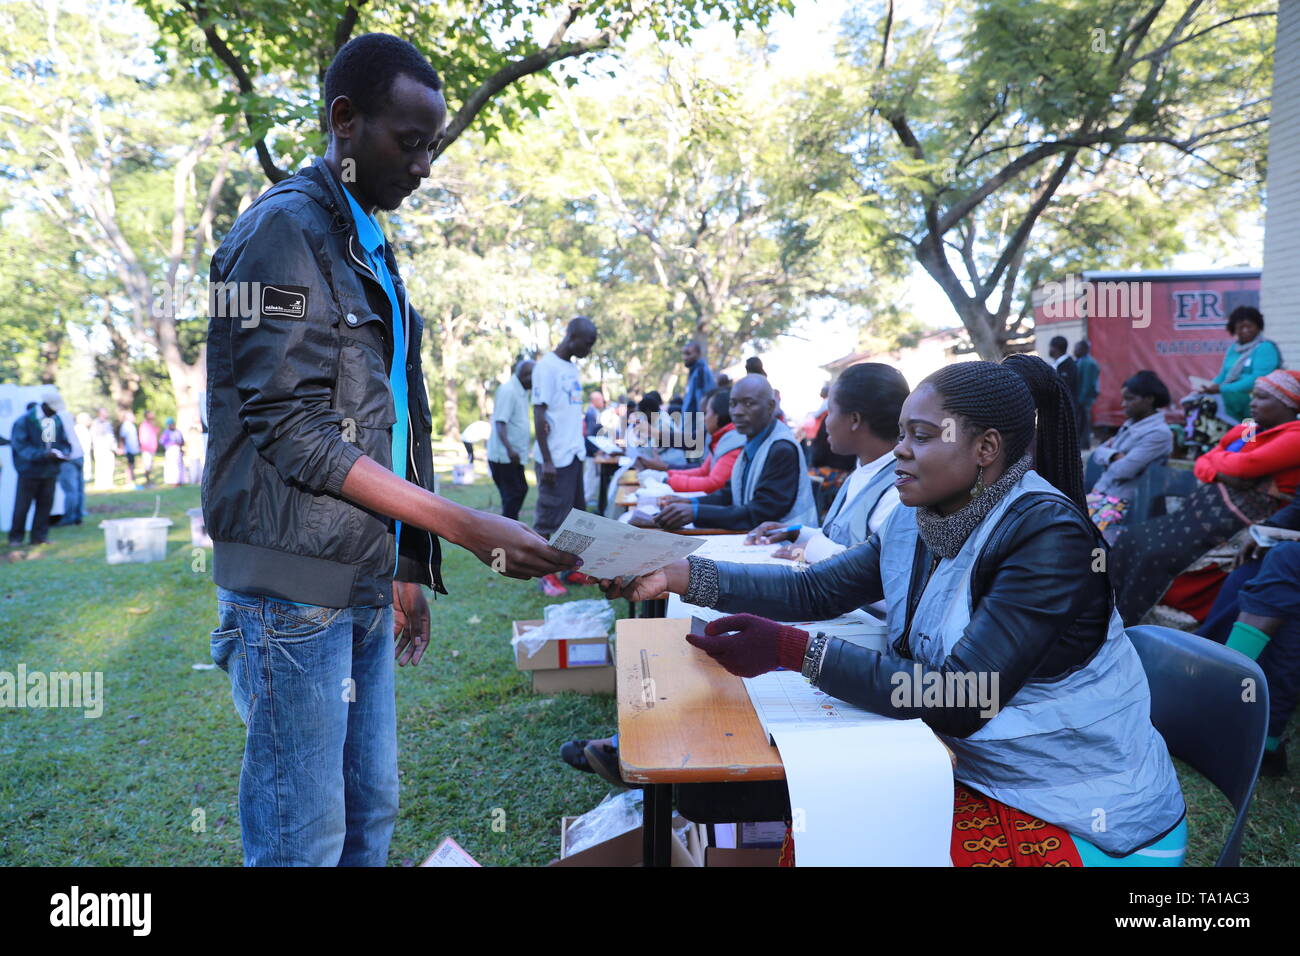 Blantyre, Malawi. 21st May, 2019. A voter receives a ballot paper at Blantyre Secondary School Polling Station in Blantyre, Malawi, May 21, 2019. Malawians across the country on Tuesday queued up to cast ballots that will determine which party is to rule the country in the next five years. Credit: Peng Lijun/Xinhua/Alamy Live News Stock Photo